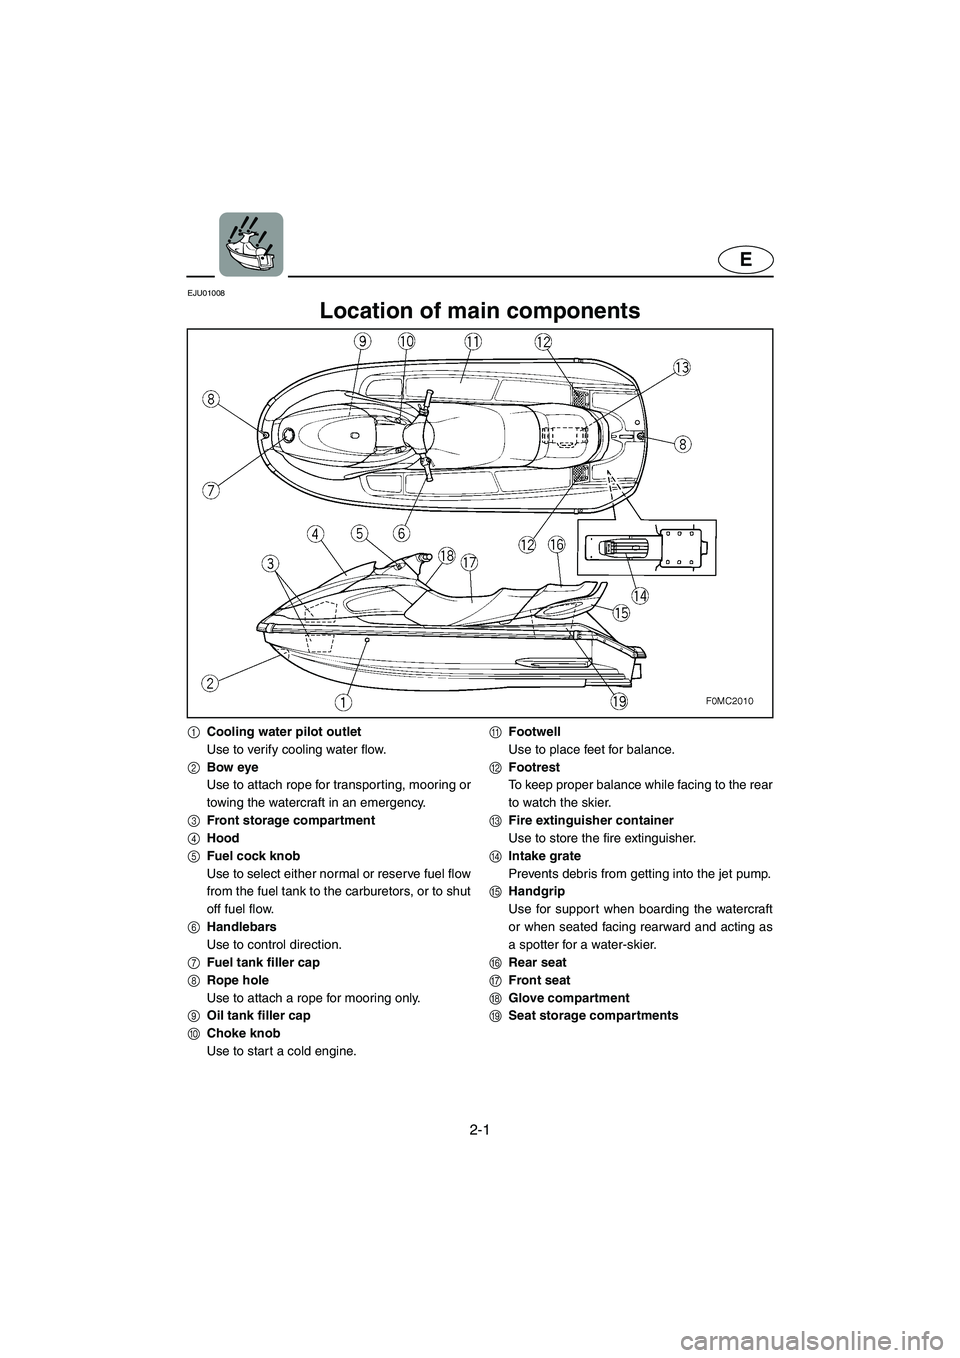 YAMAHA XL 700 2005  Owners Manual 2-1
E
EJU01008 
Location of main components 
1Cooling water pilot outlet
Use to verify cooling water flow.
2Bow eye
Use to attach rope for transporting, mooring or
towing the watercraft in an emergenc